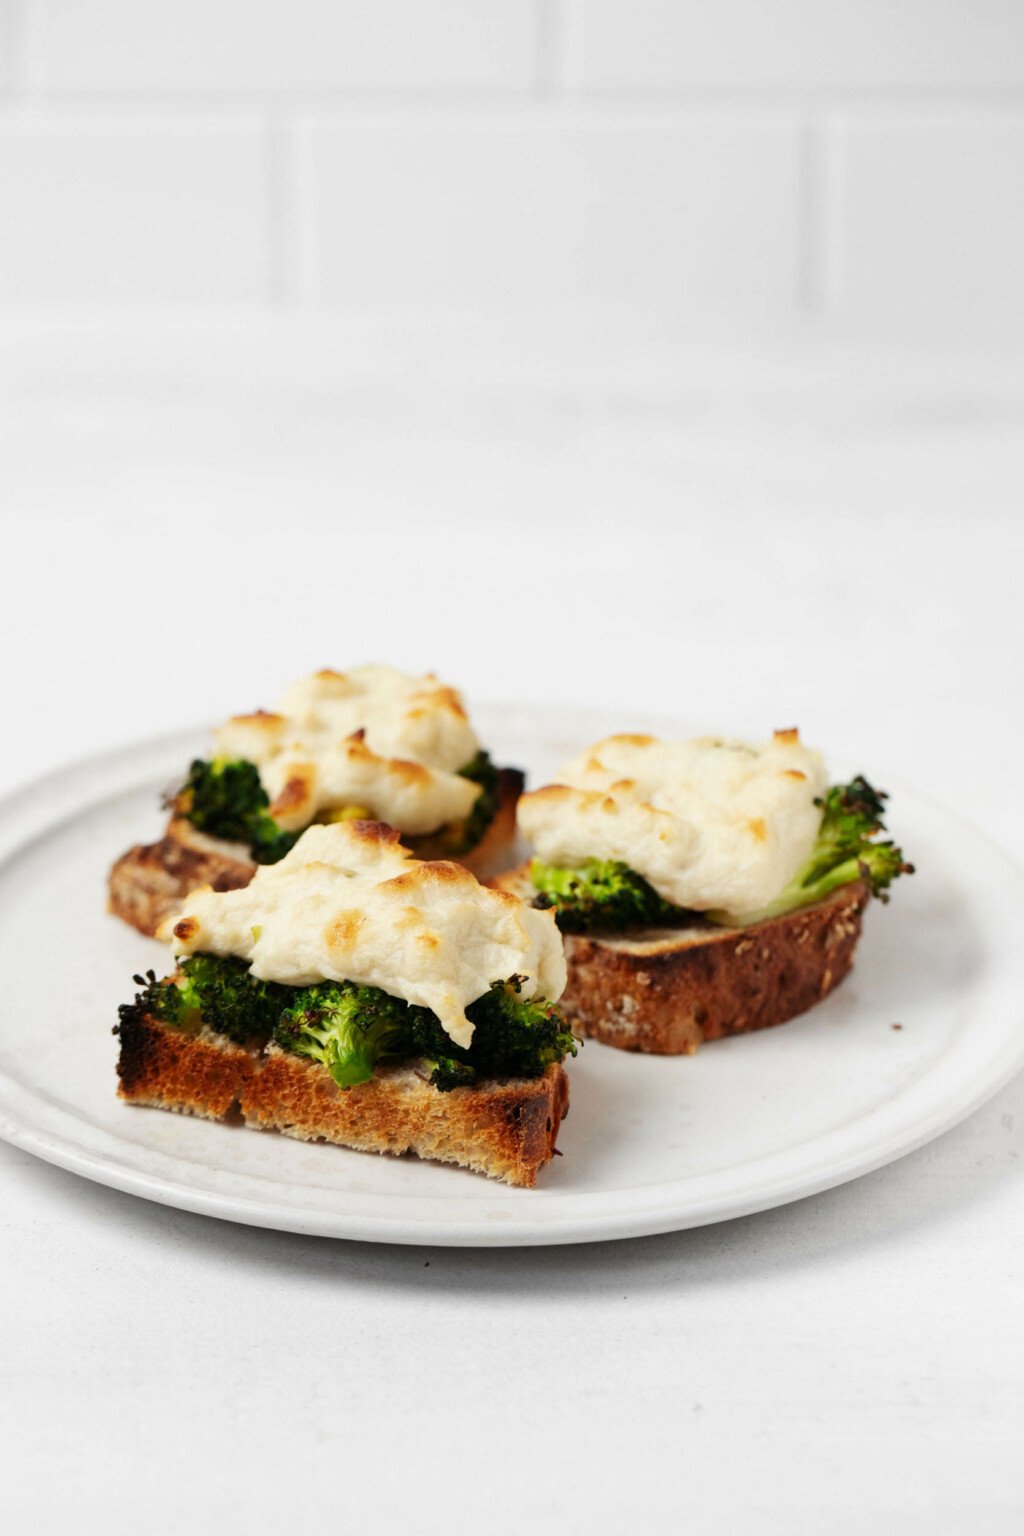 An angled photo of toasted halves of bread, which are topped with a plant-based, mozzarella style cheese and bright green broccoli florets. There's a white tile surface in the background.